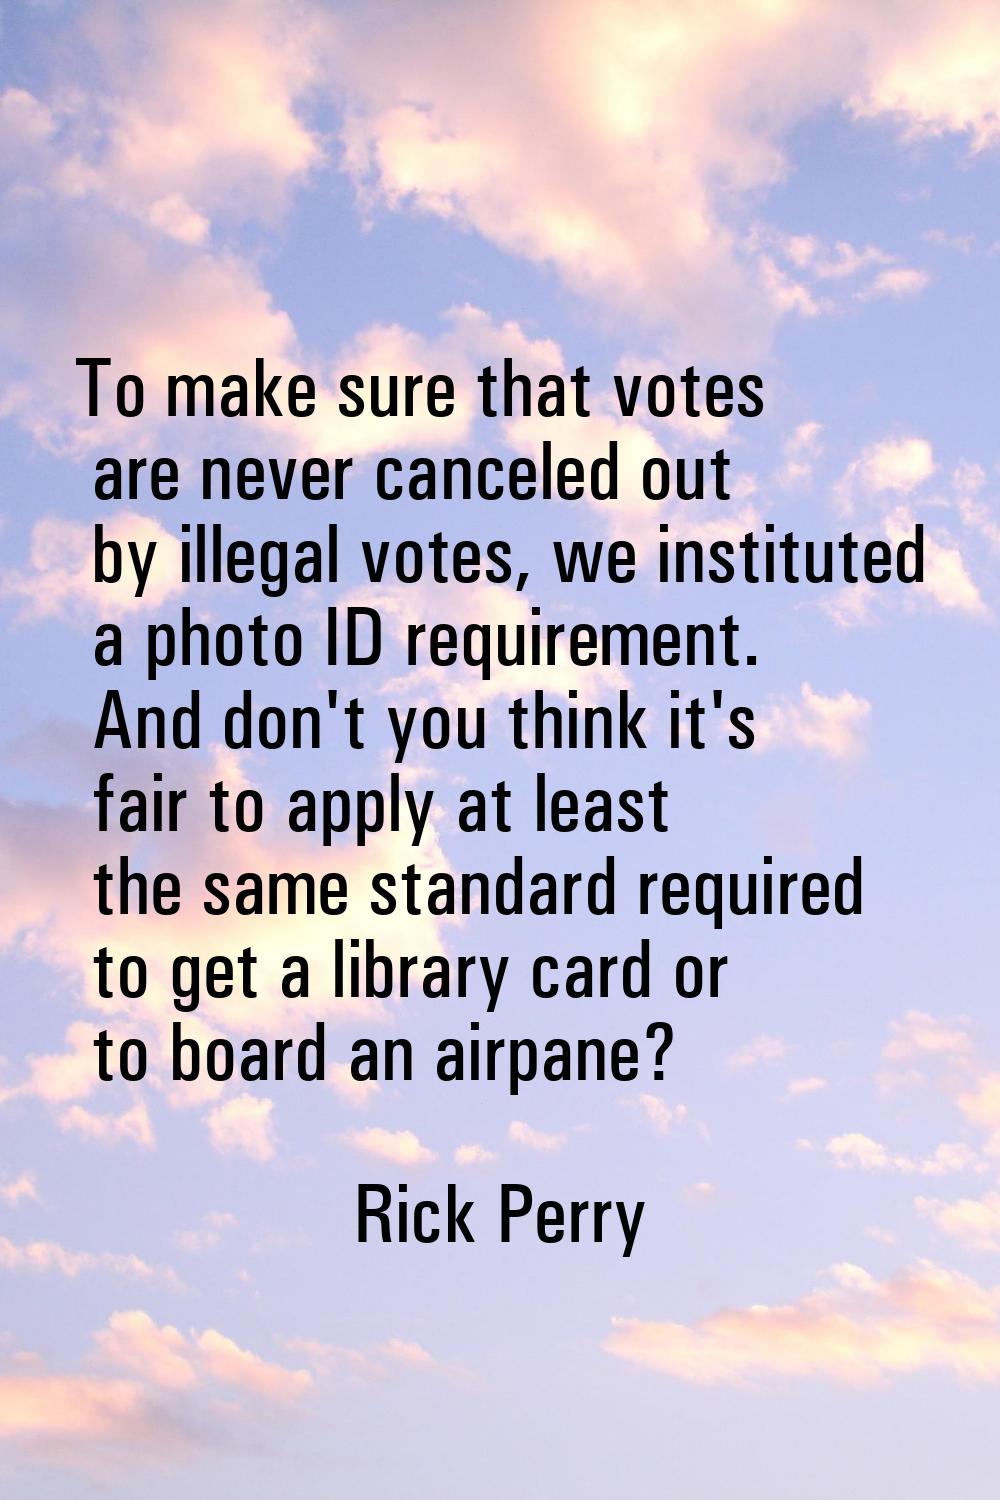 To make sure that votes are never canceled out by illegal votes, we instituted a photo ID requireme